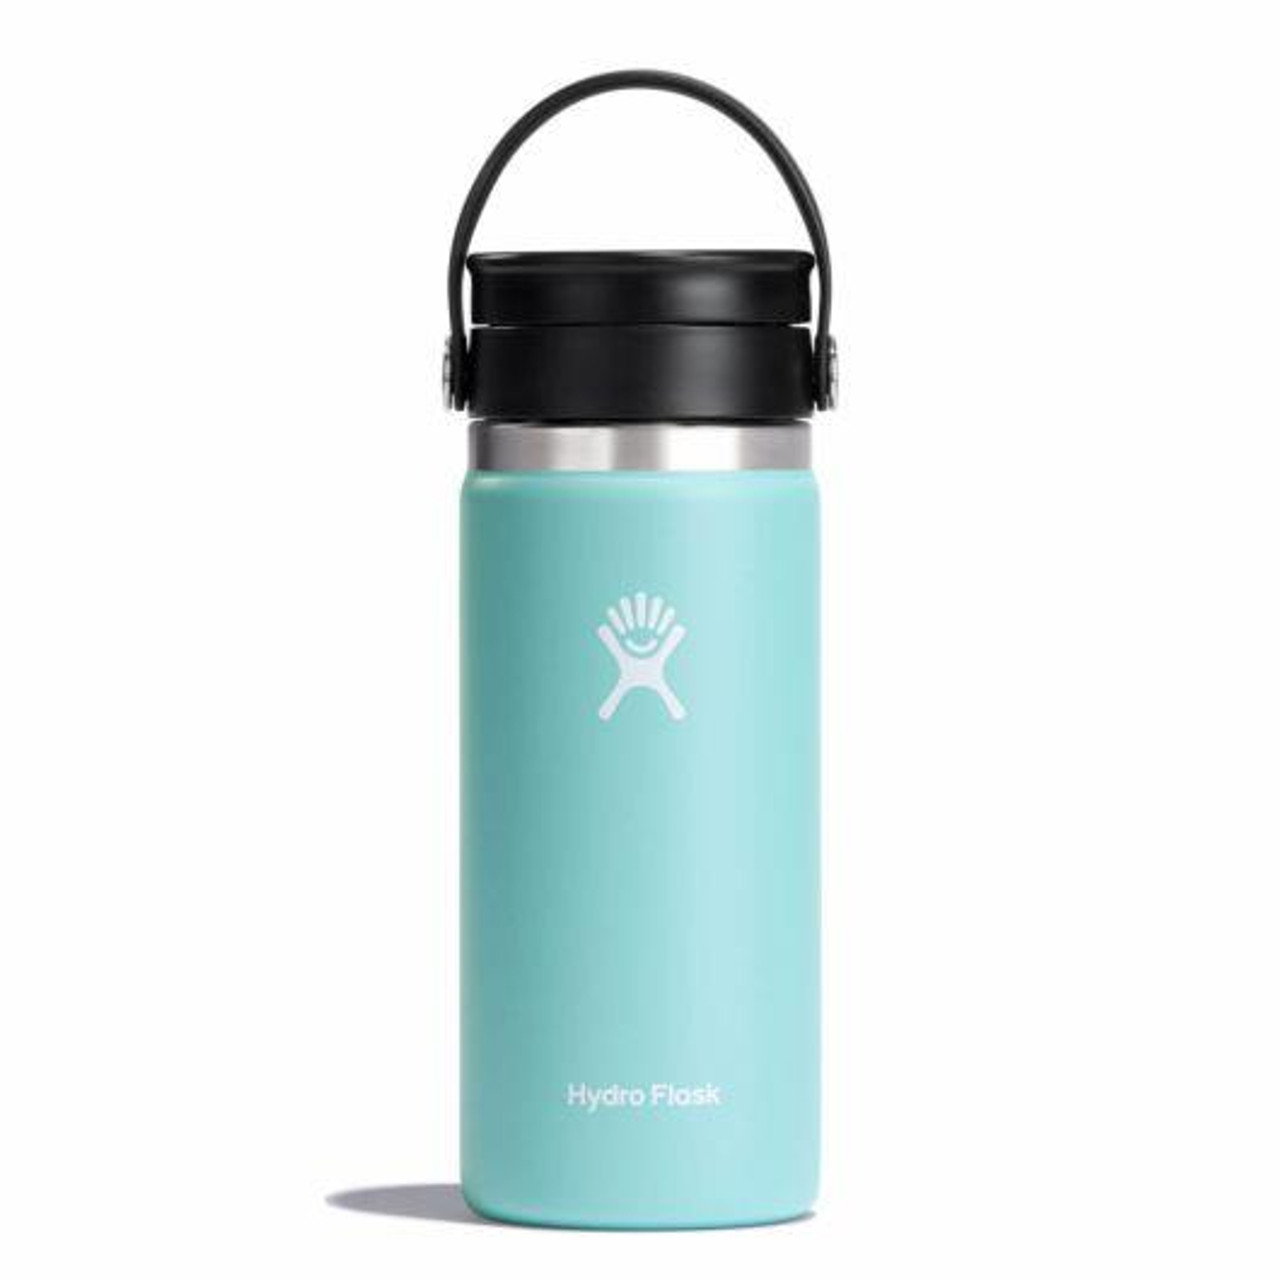 https://cdn11.bigcommerce.com/s-0xqgn36m/images/stencil/1280x1280/products/437/3722/Hydro-Flask-16oz-Wide-Mouth-Bottle-with-Flex-Sip-Lid-Multiple-Colors-810007833828_image2__14924.1701988892.jpg?c=2